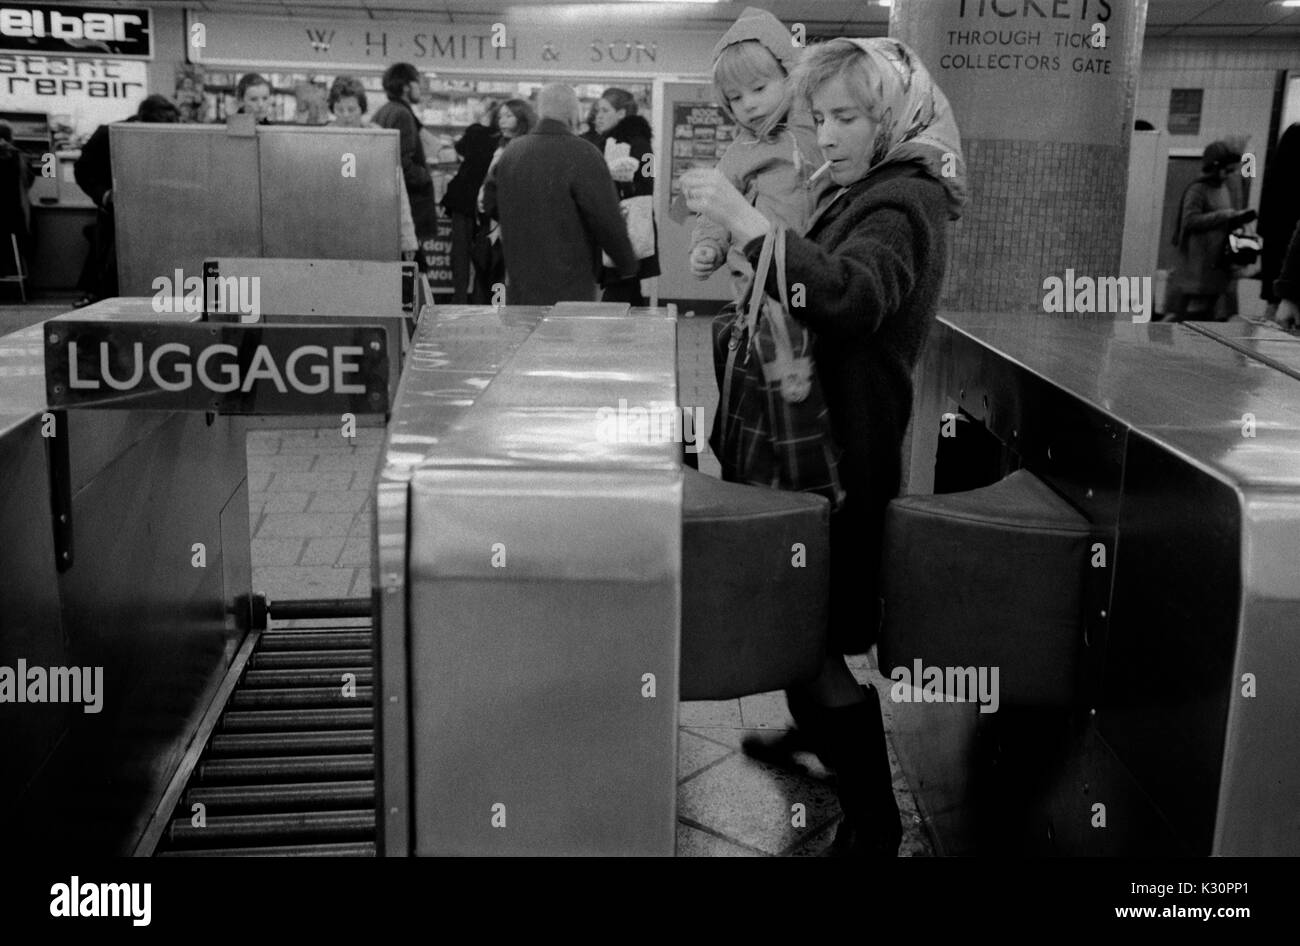 Underground tube train station new ticket barriers 1970s Mother and child, mum smoking carrying small child in her arms, 1975. UK HOMER SYKES Stock Photo